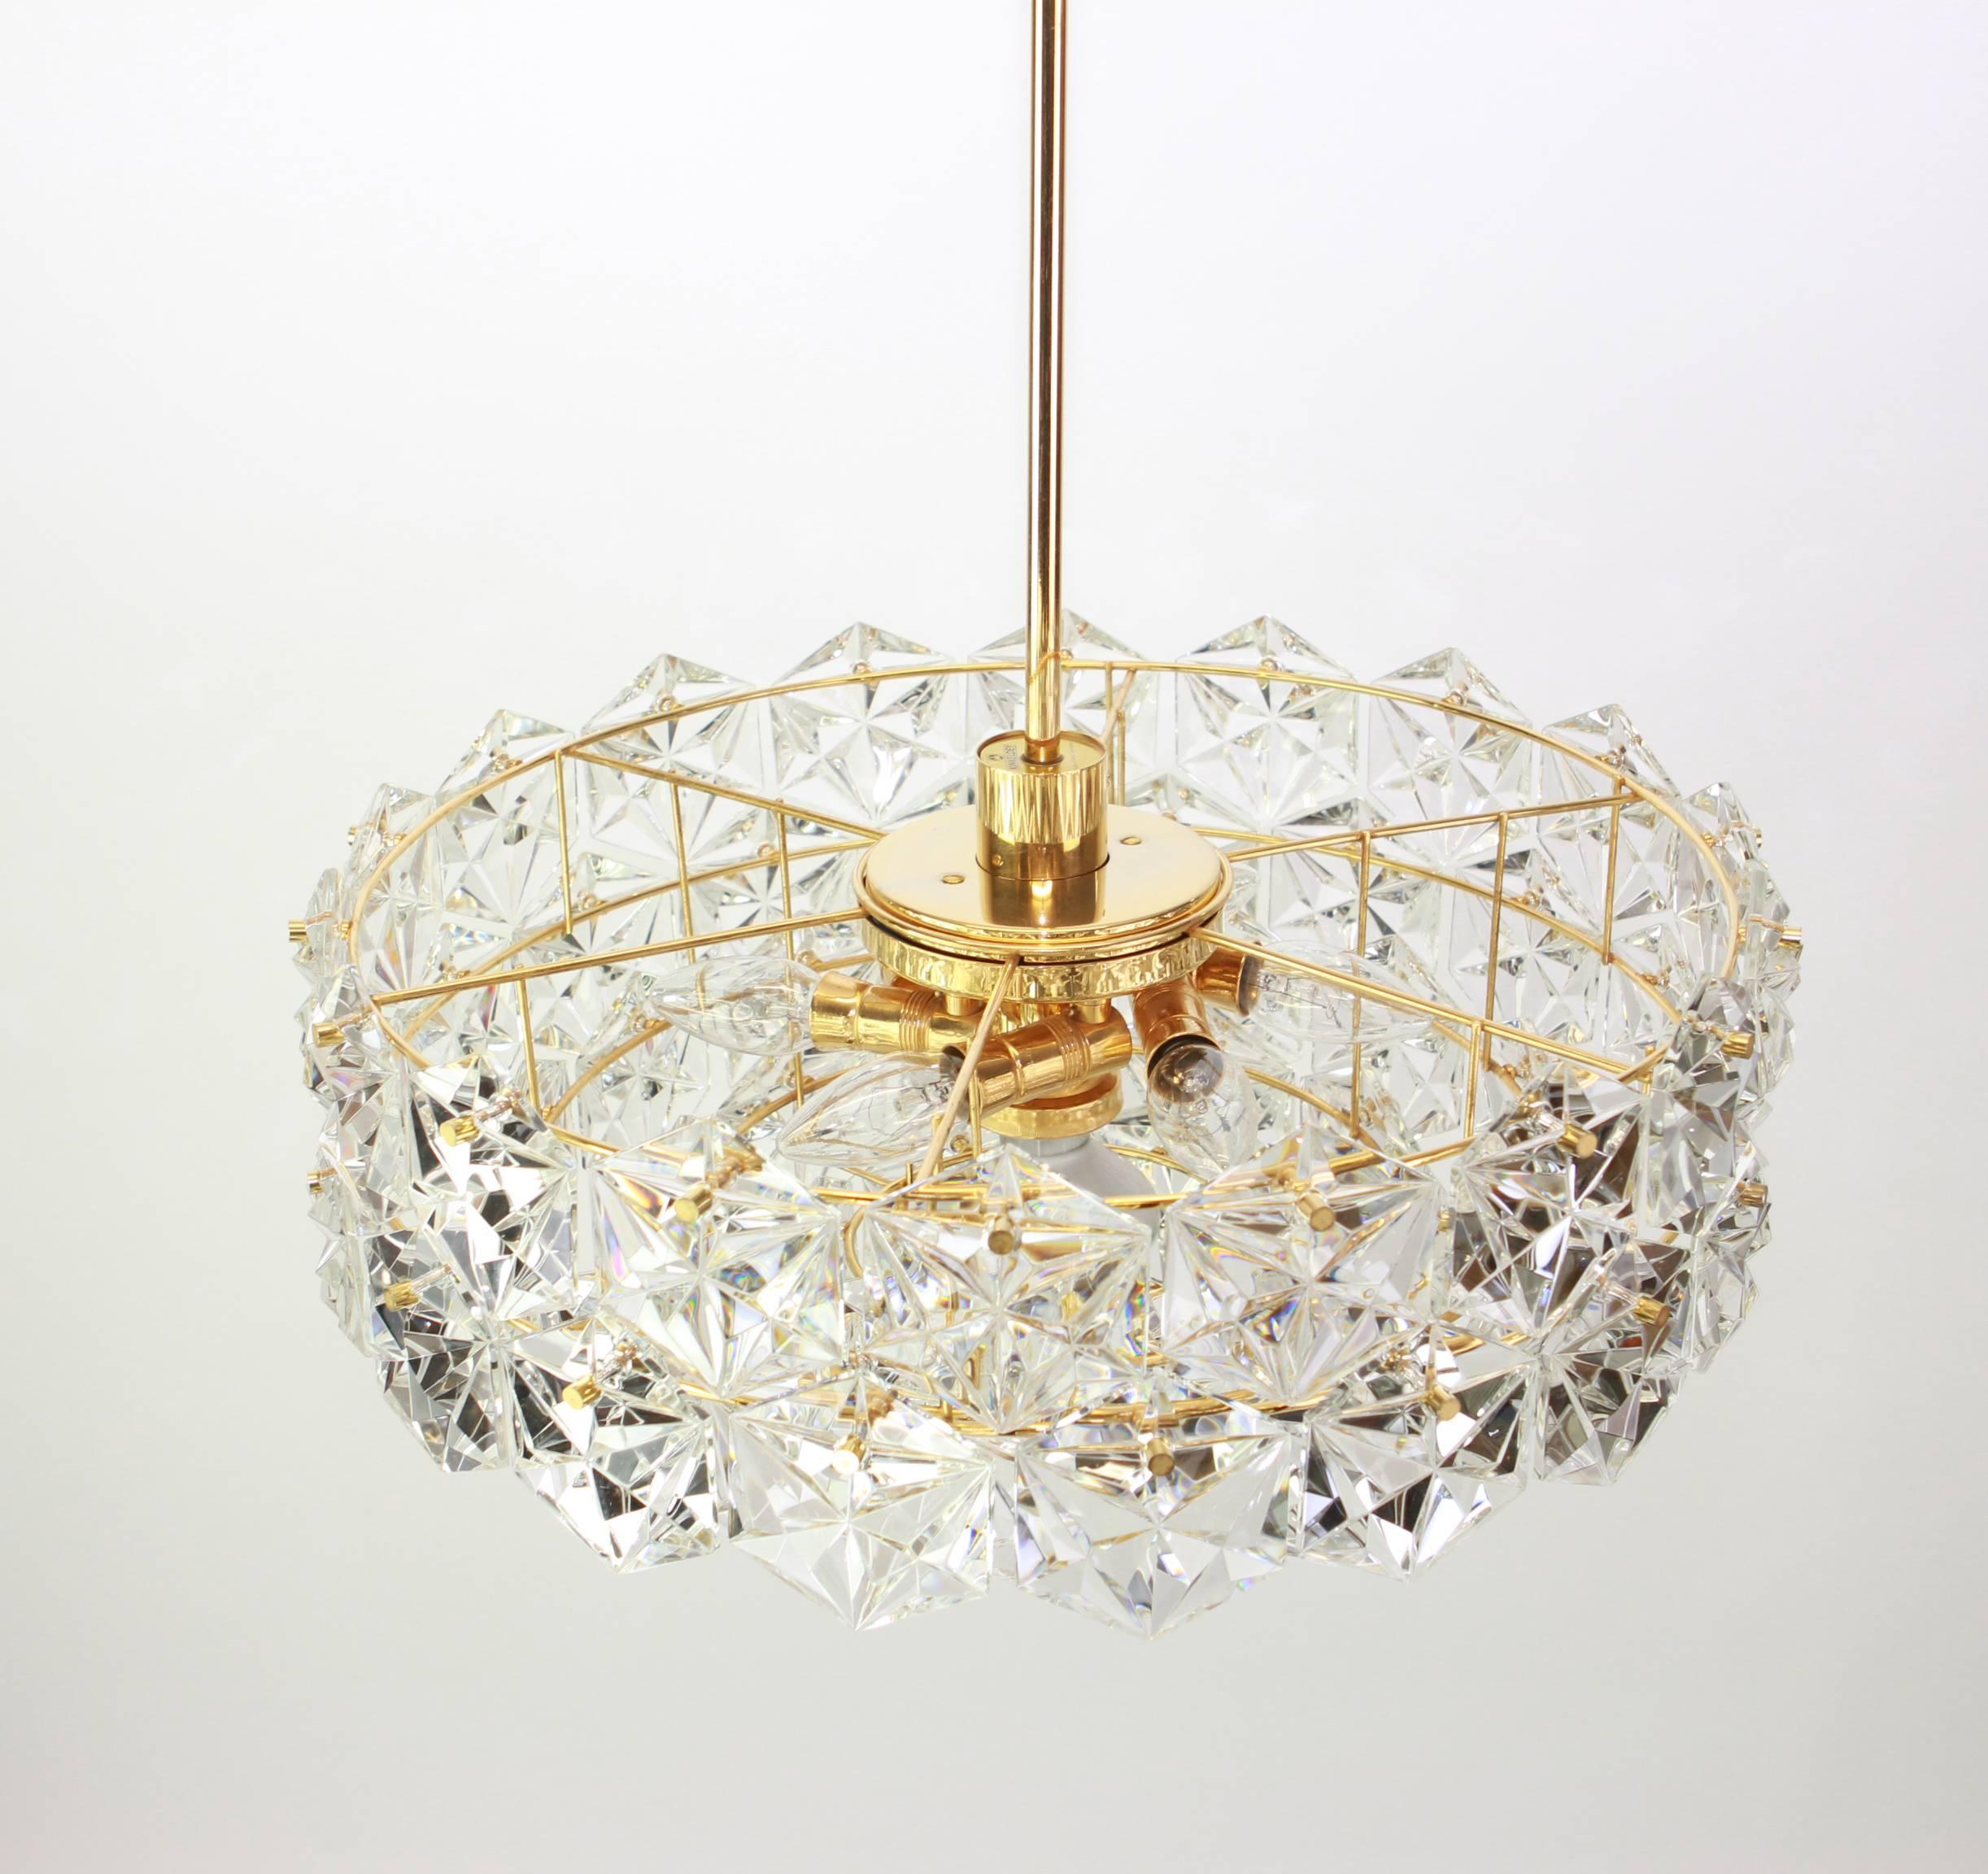 A stunning five-tier chandelier by Kinkeldey, Germany, manufactured in circa 1970-1979. A handmade and high quality piece. The chandelier features a 24 karat gold-plated five-tier structure with lots of facetted crystal glass elements.

High quality